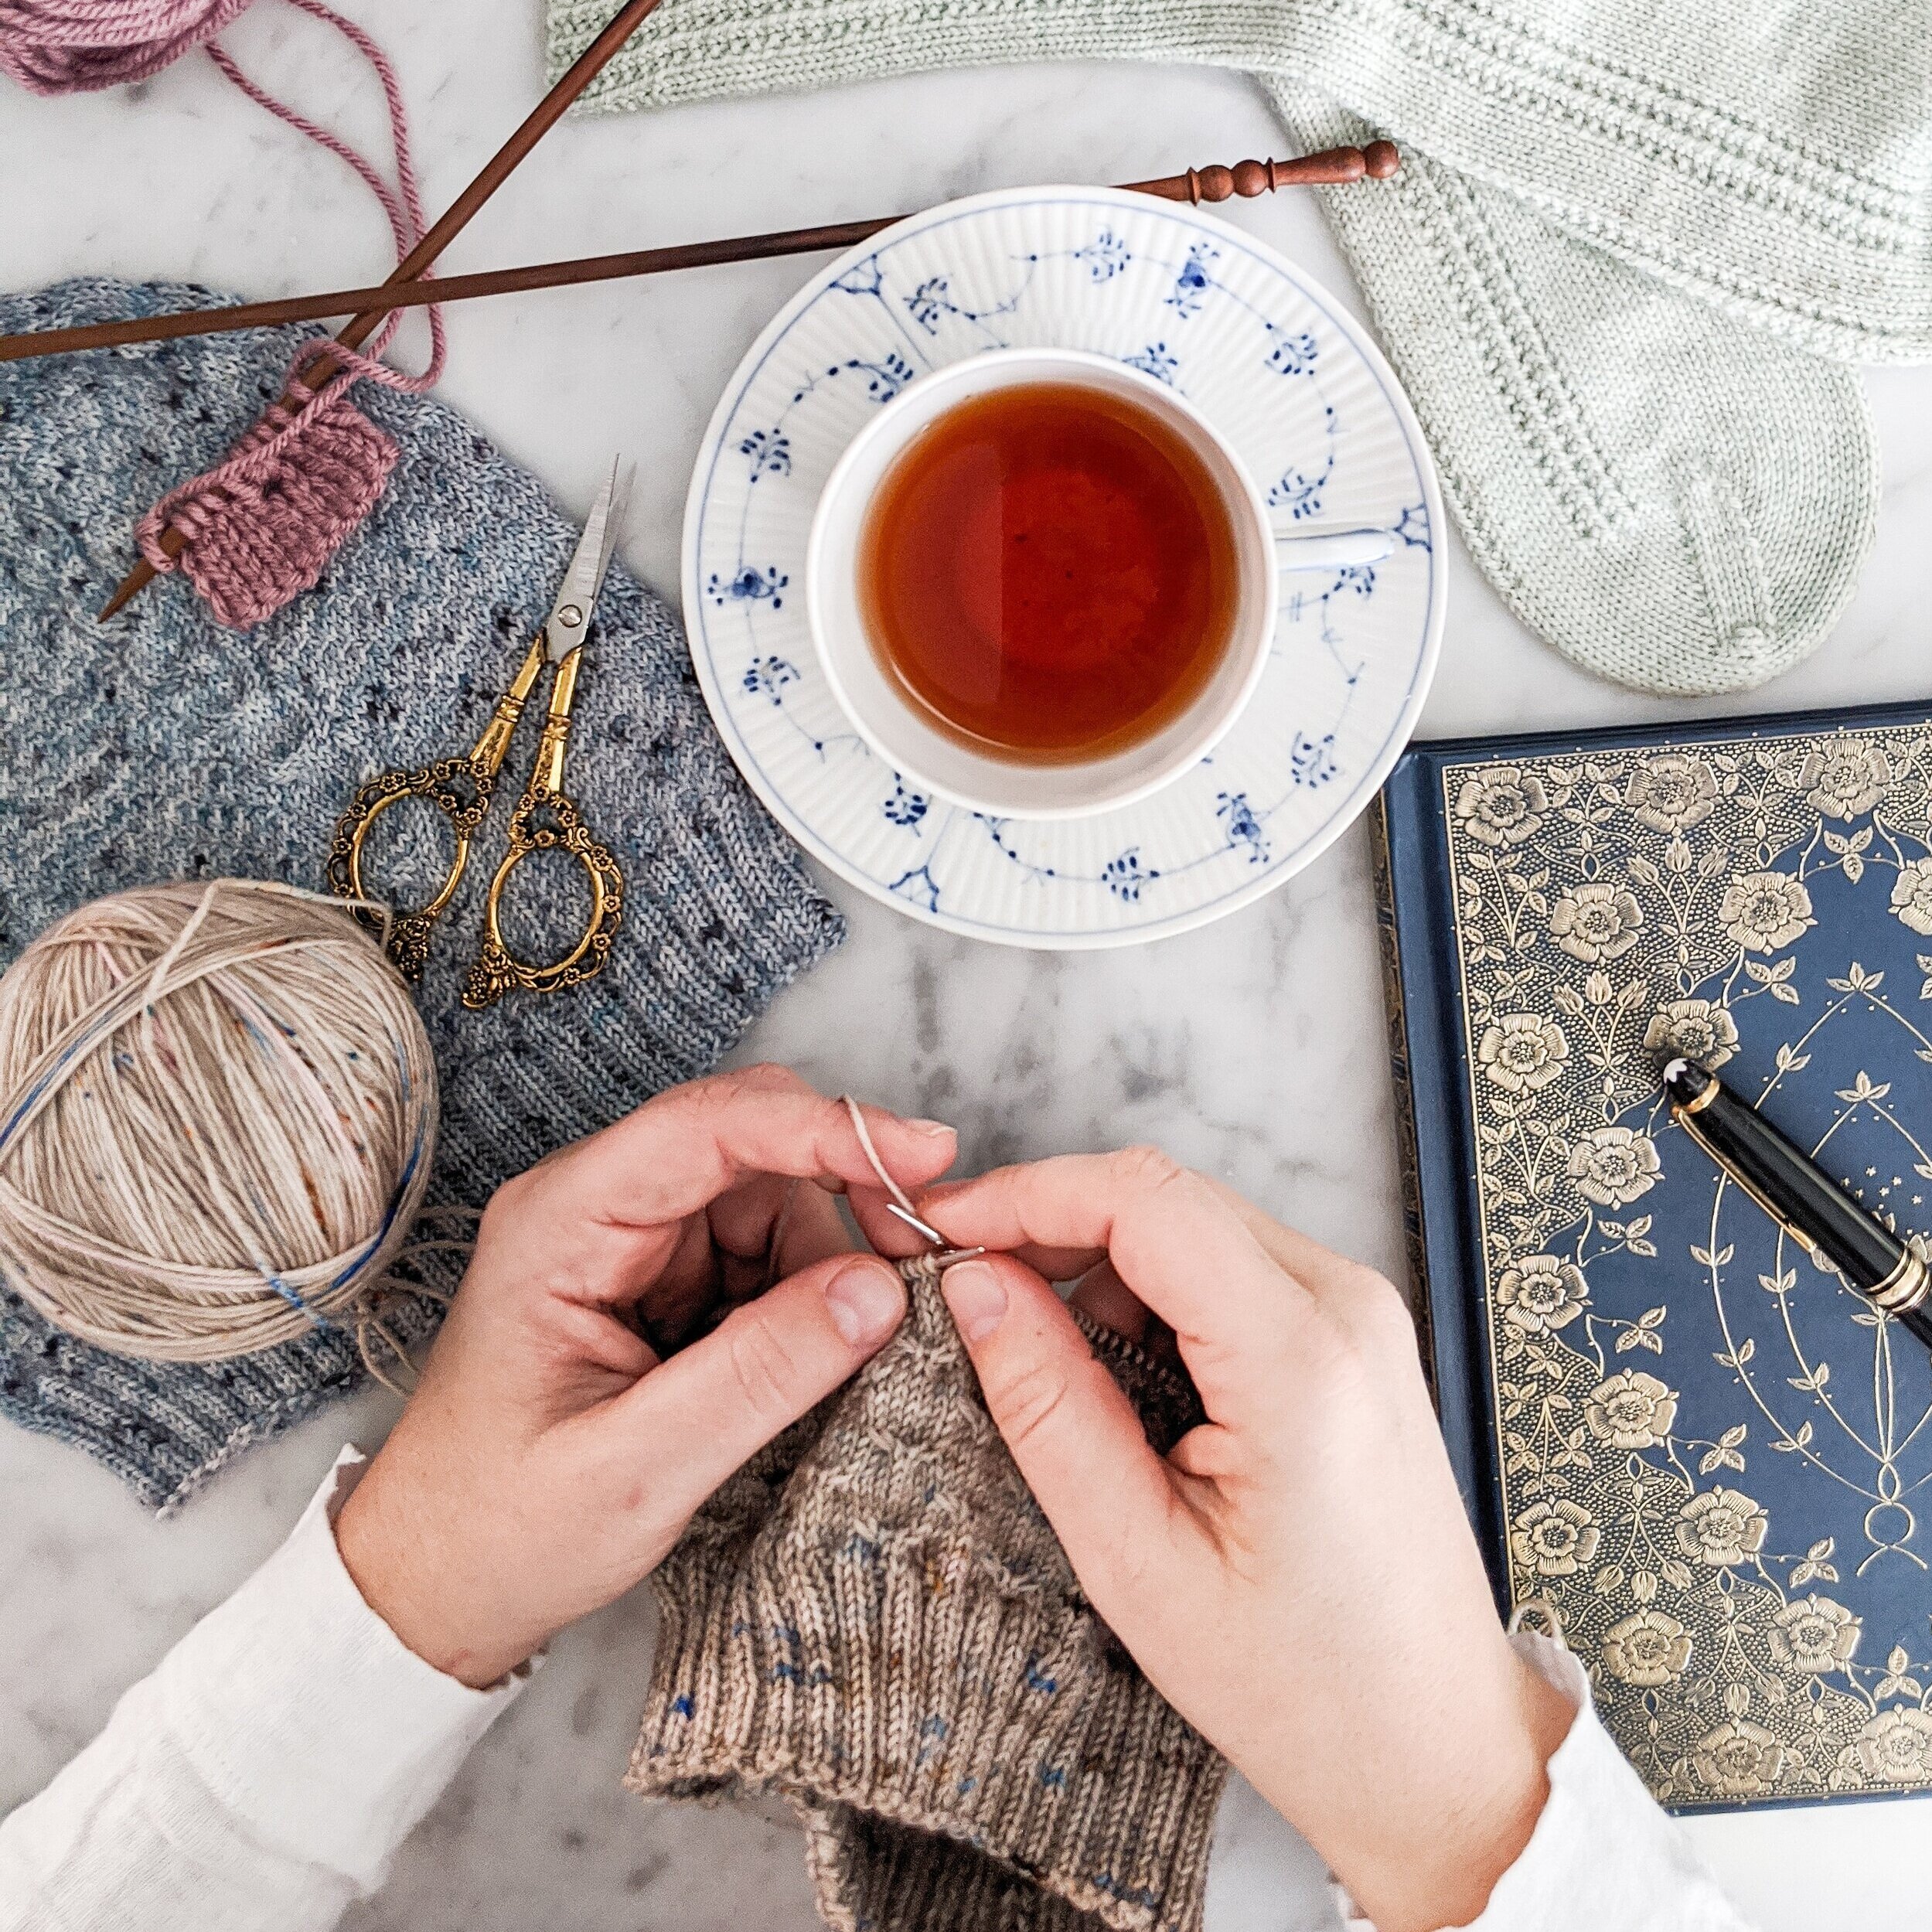 A pair of white hands works on a hat knit with light brown yarn speckled with pink and blue. They are surrounded by other knit items, a teacup filled with tea, a journal with a gilded cover, and ornate scissors. This beginner's guide to knitting will help you get started on your knitting journey.